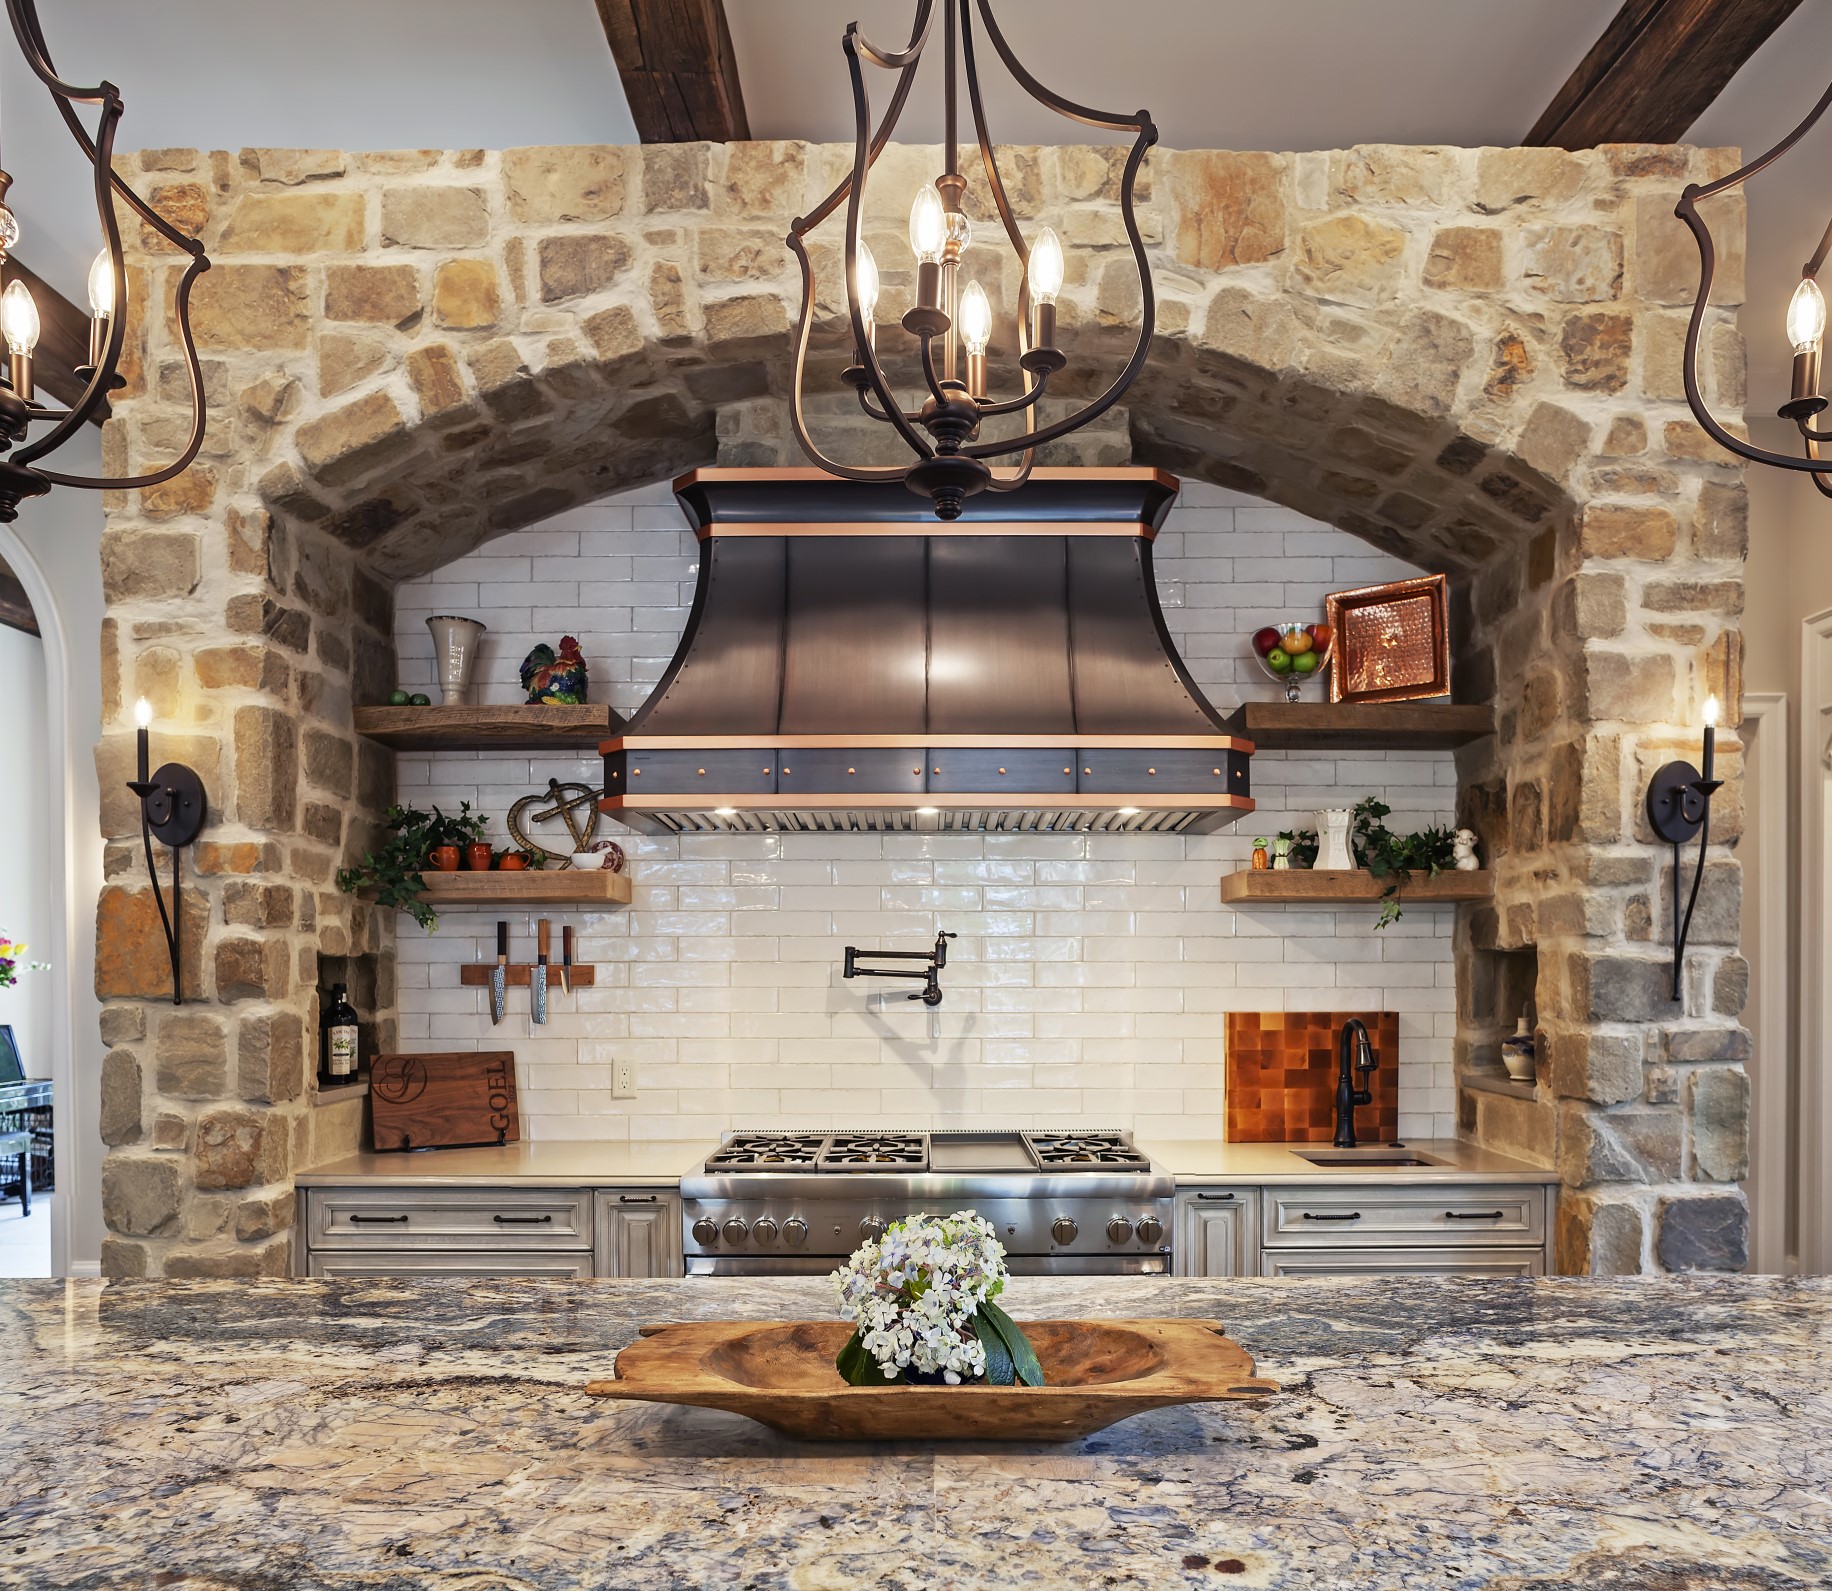 Rustic kitchen with modern touches - World CopperSmith